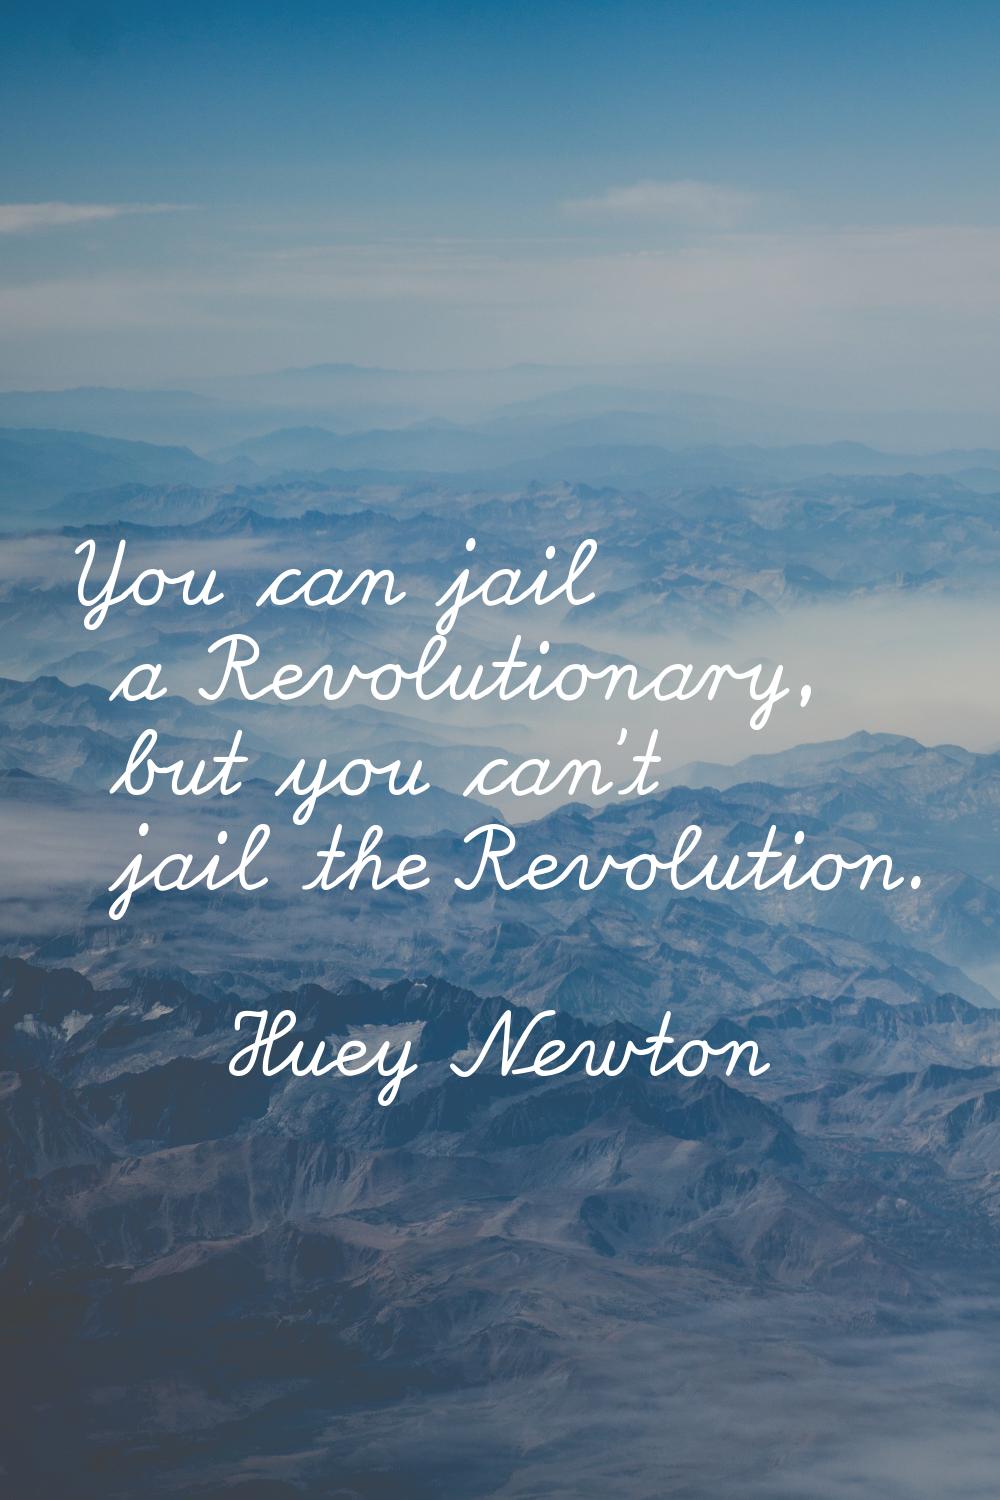 You can jail a Revolutionary, but you can't jail the Revolution.